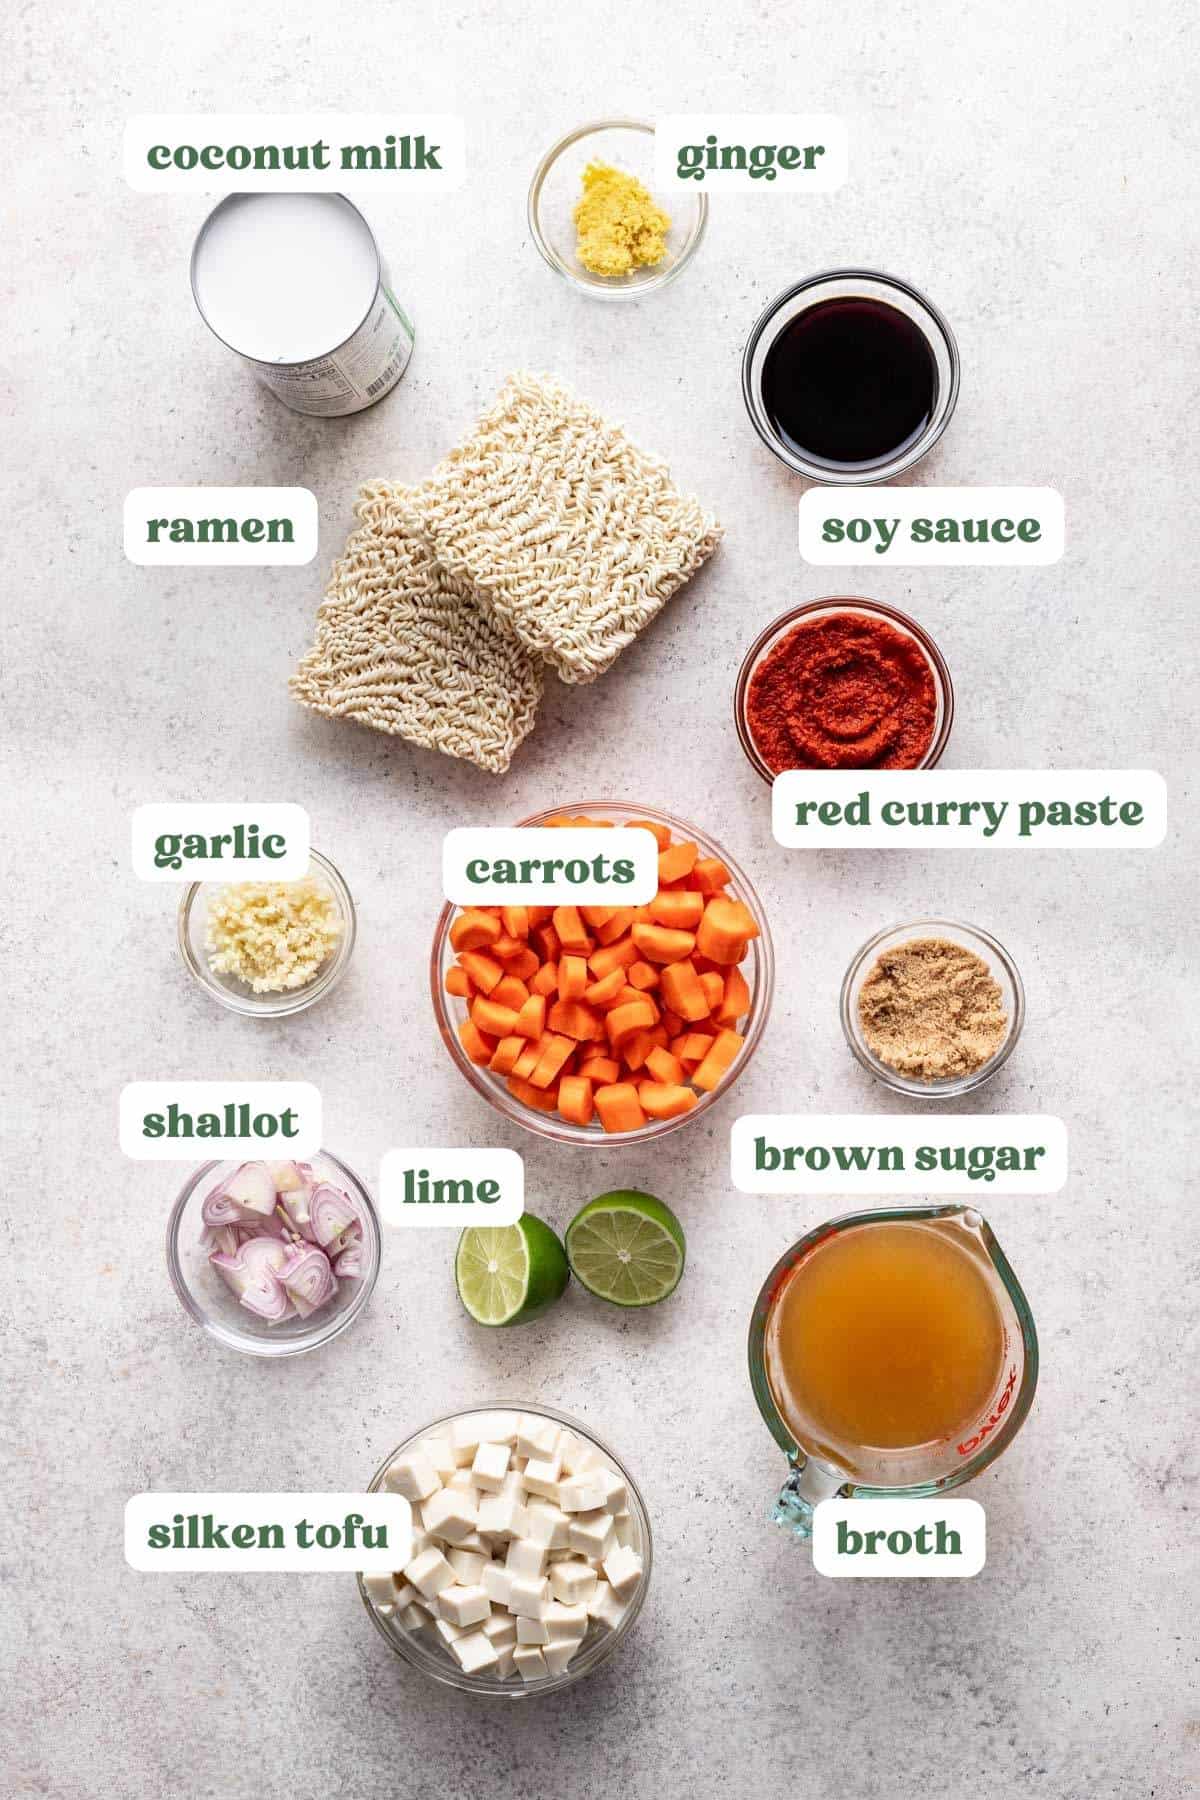 Overview of the ingredients you'll need to make this vegan red curry ramen measured and labeled.